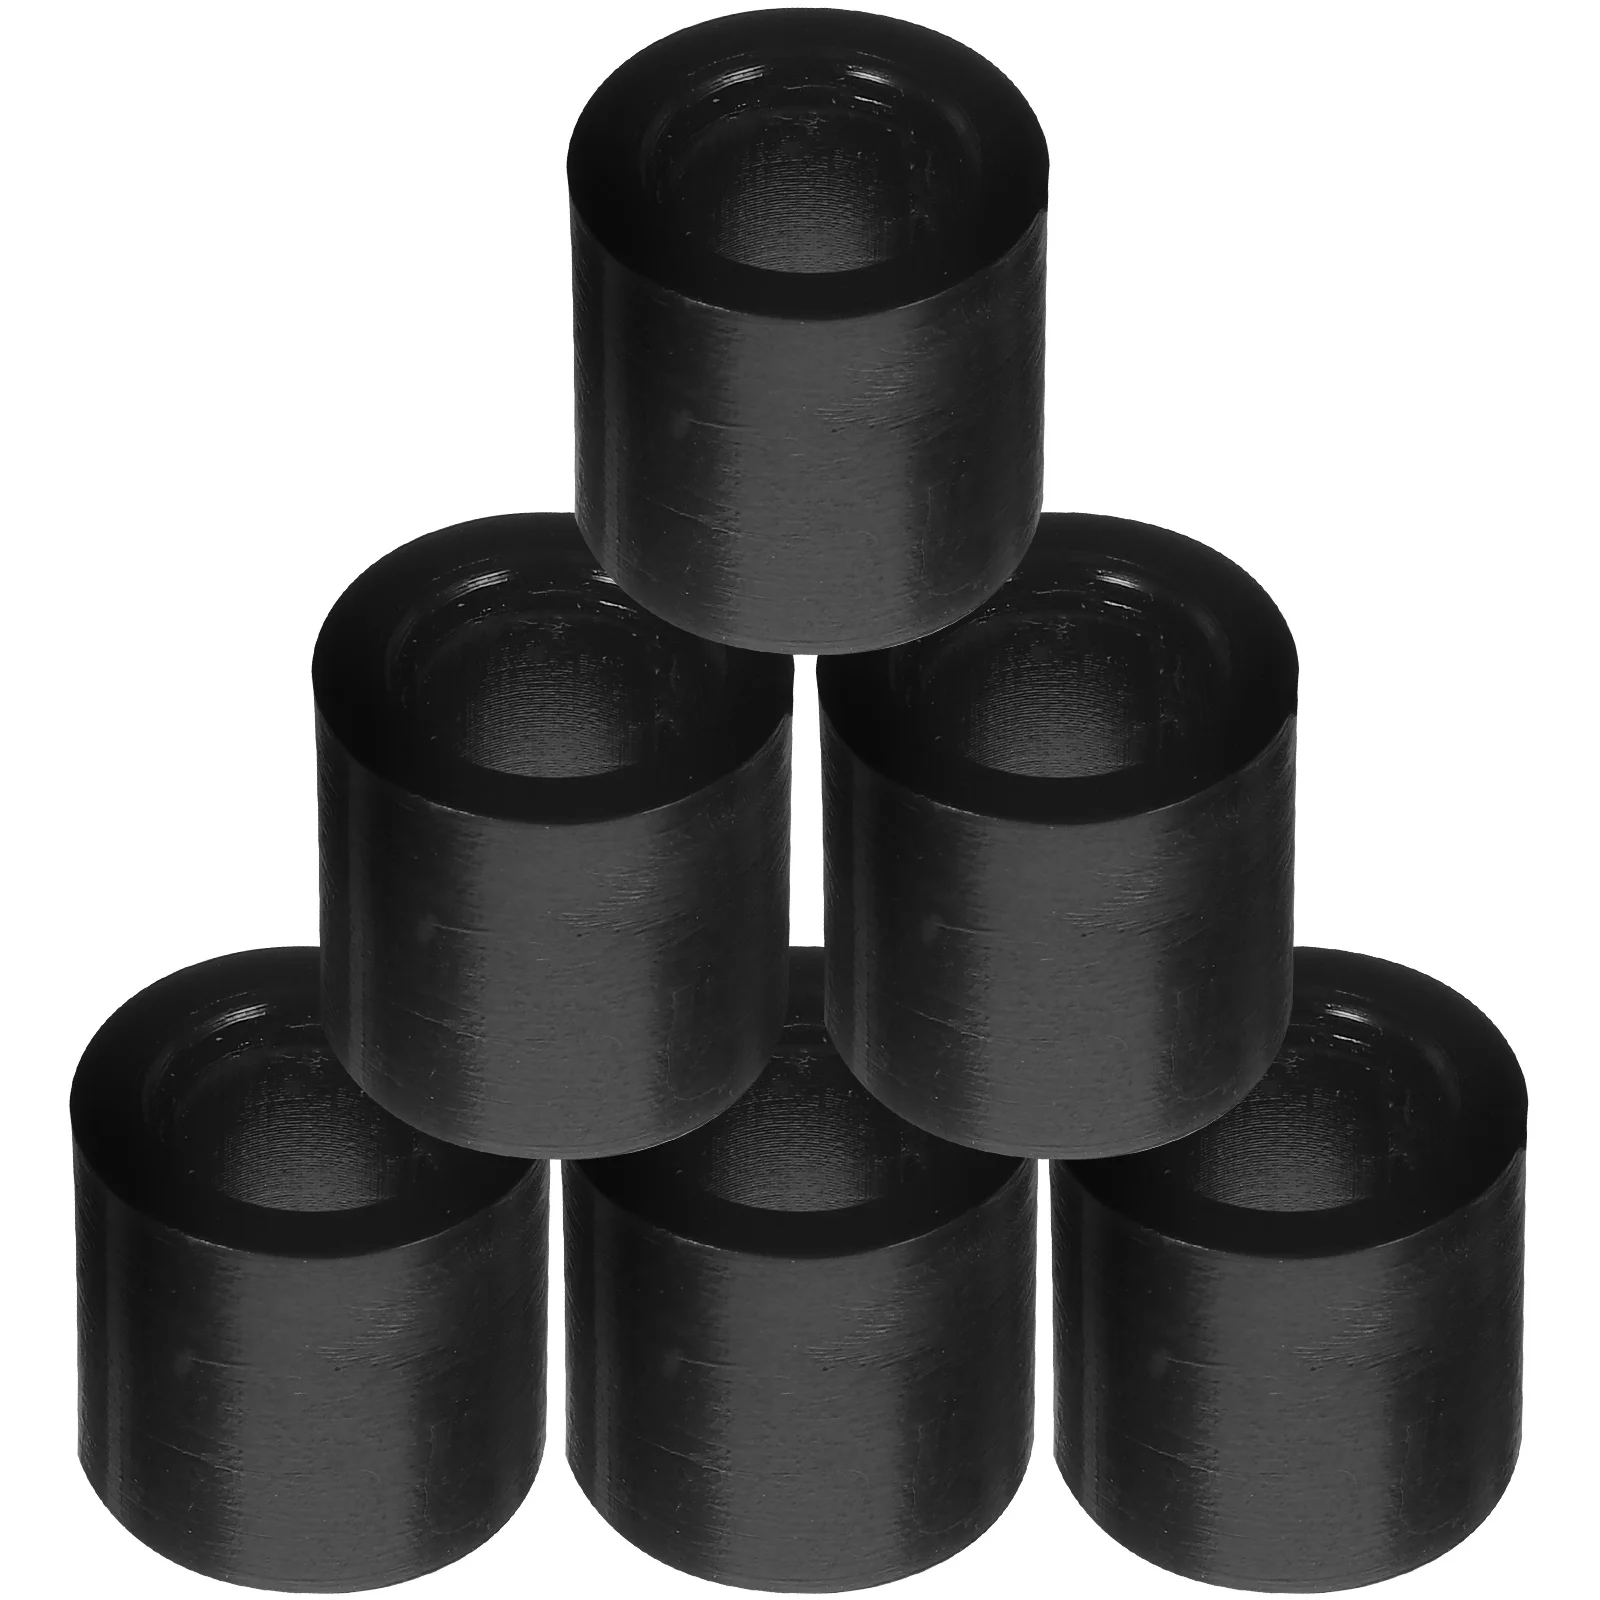 

6 Pcs Snooker Cue Billiard Protective Cover Pool Tips Parts Replacement Ferrules Accessories Stick for Plastic Repair Kit